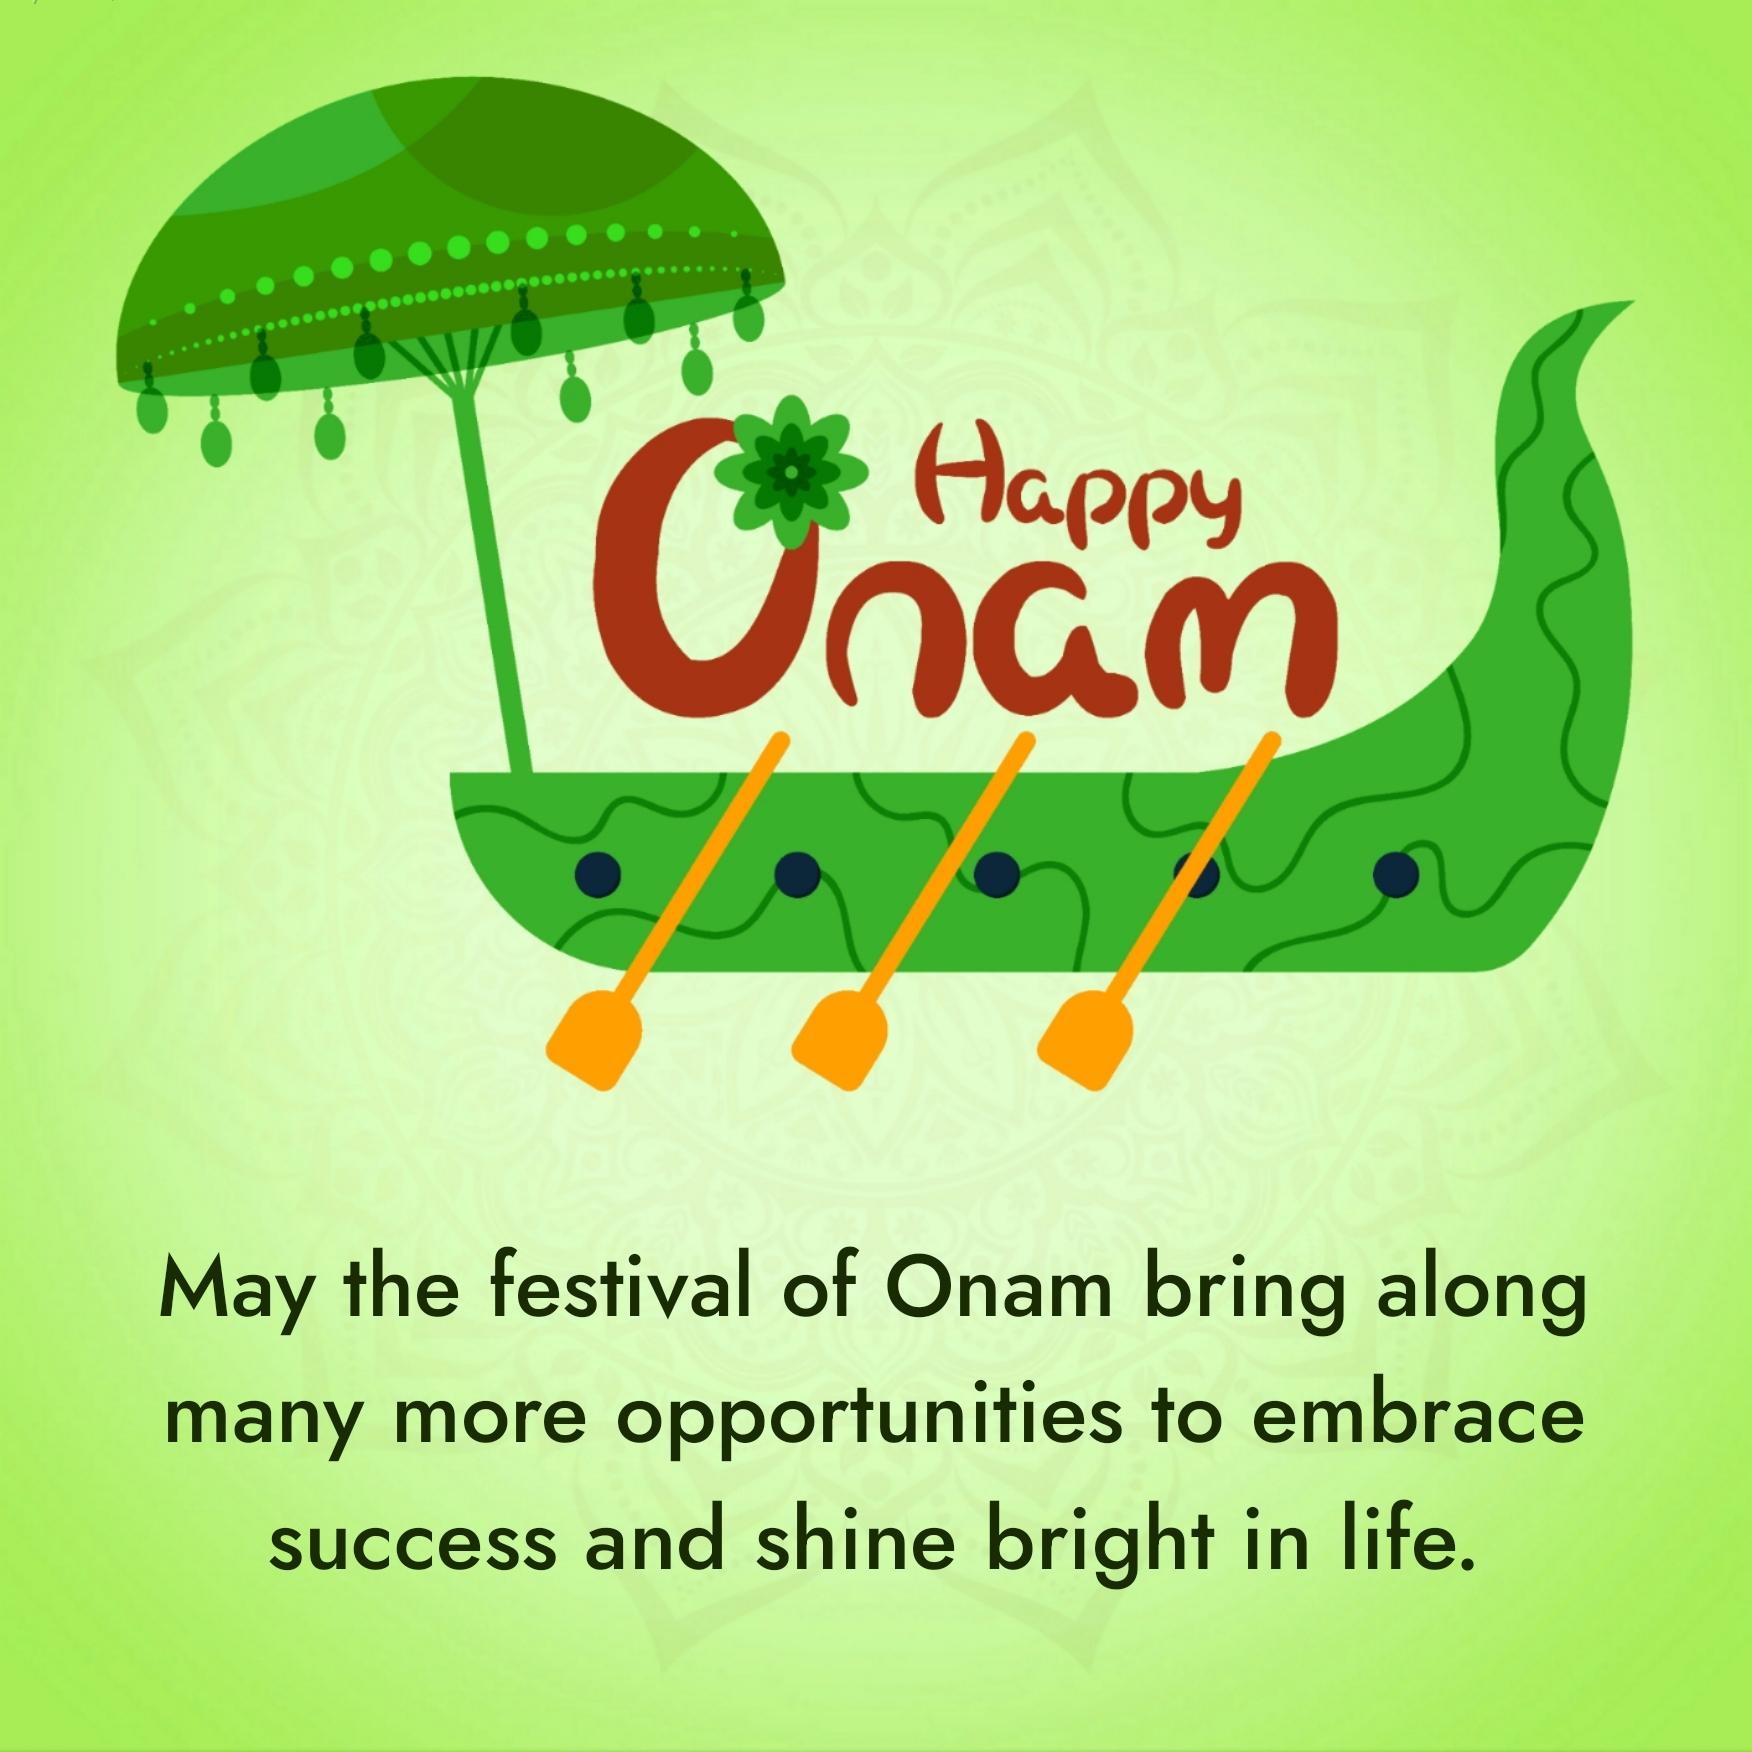 May the festival of Onam bring along many more opportunities